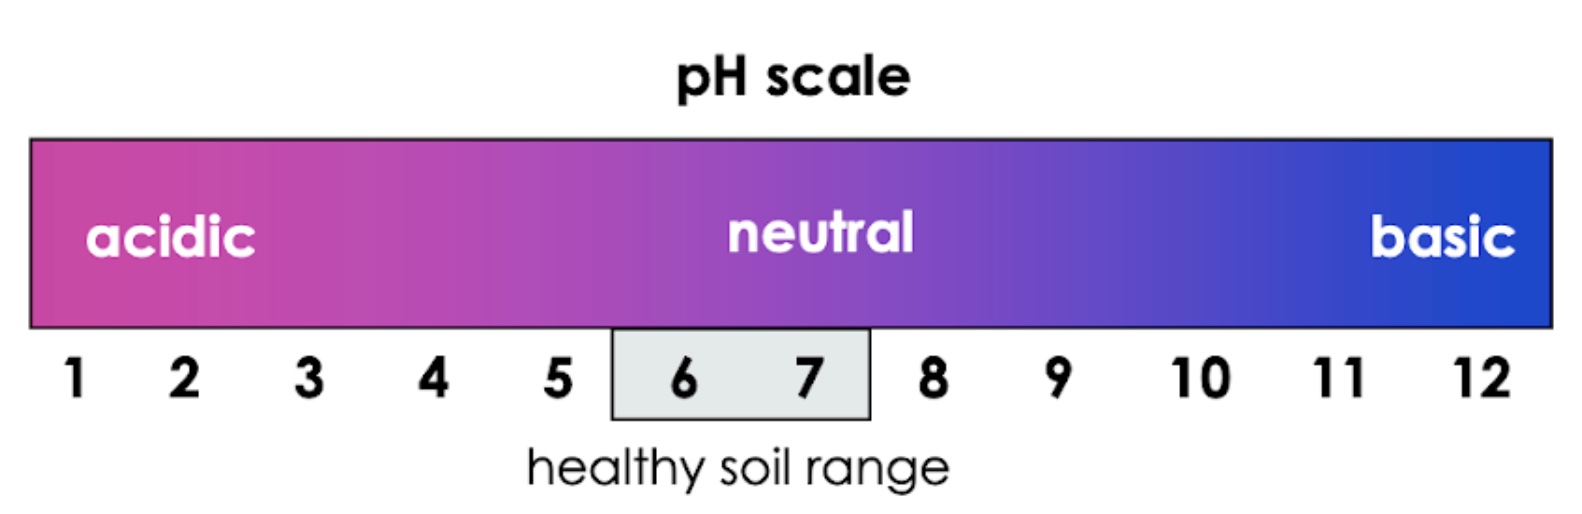 A pH scale from the acidic end, shown at the left in pink and starting at 1, to the basic end at the right, shown in blue up to 14. A range around 5.5 to 7.5 is highlighted in grey and labeled as the health soil range.